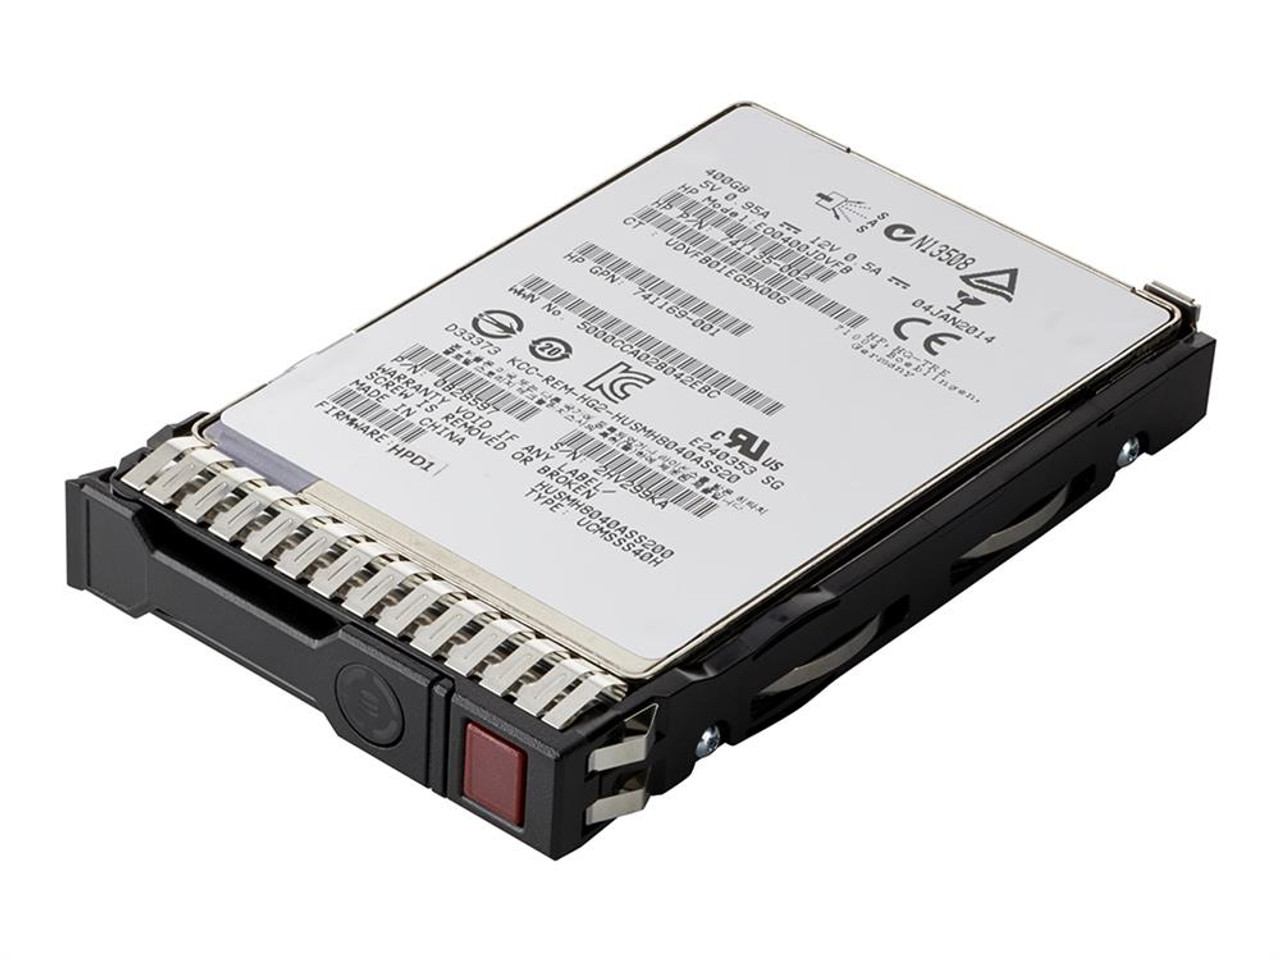 P05986-B21 HPE 1.92TB SATA 6Gbps Mixed Use 2.5-inch Internal Solid State Drive (SSD) with Smart Carrier